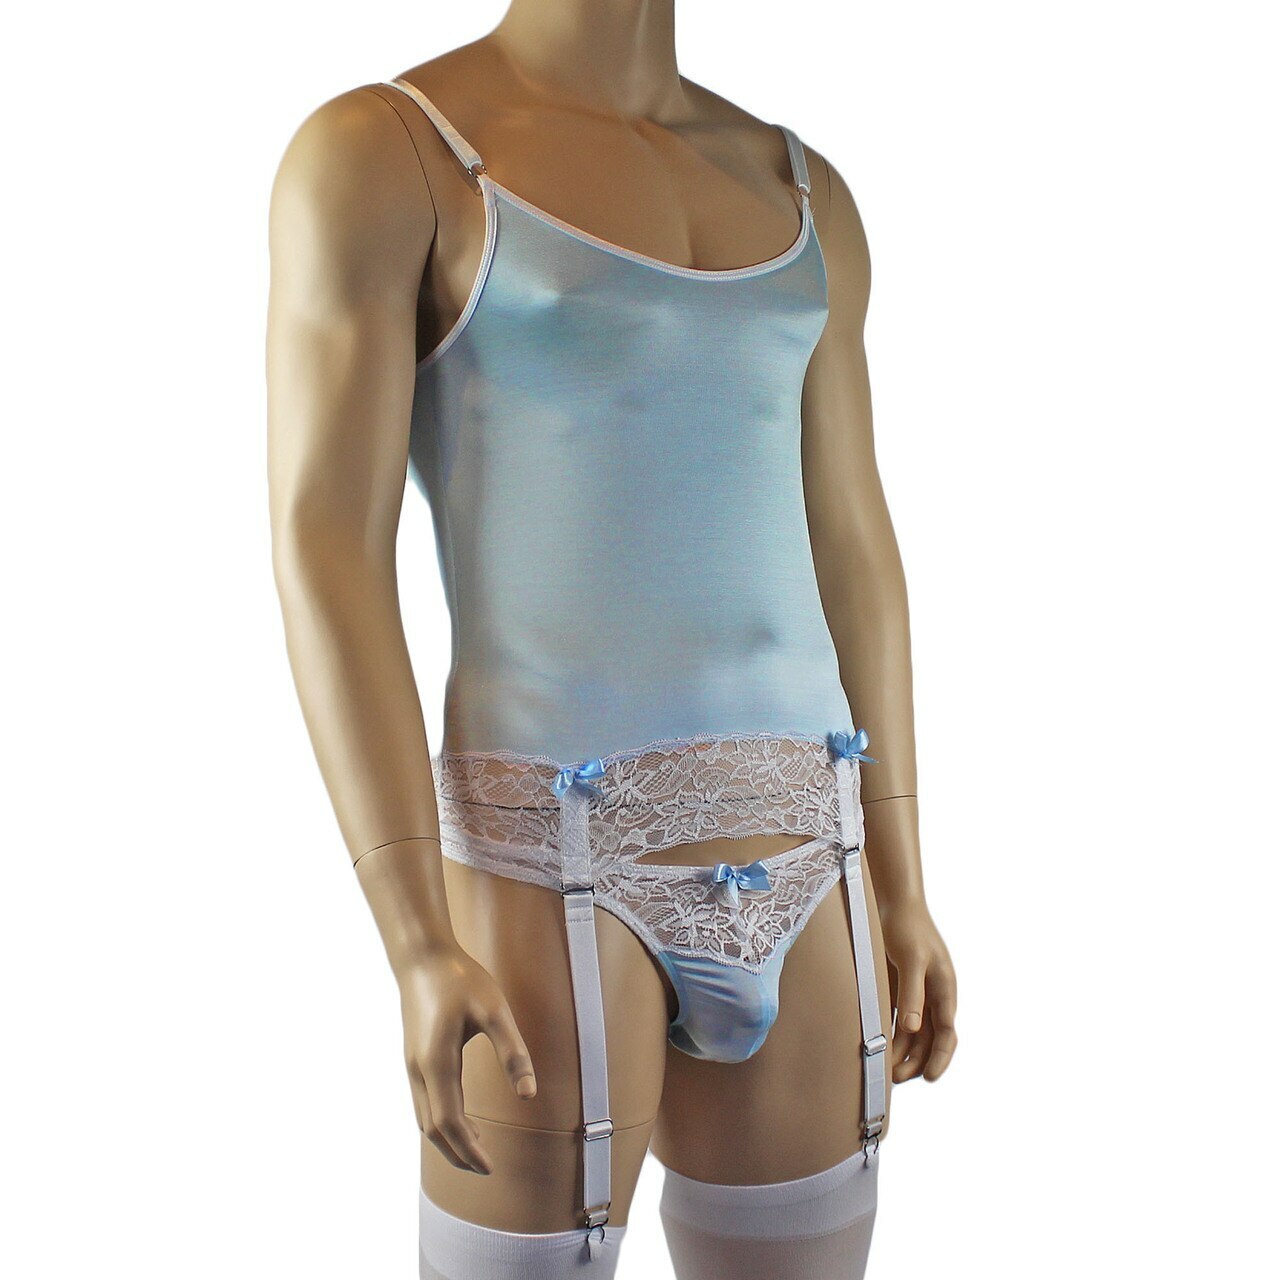 Mens Joanne Camisole Bustier Garter Top with Thong & Stockings - Sizes up to 3XL Light Blue and White Lace